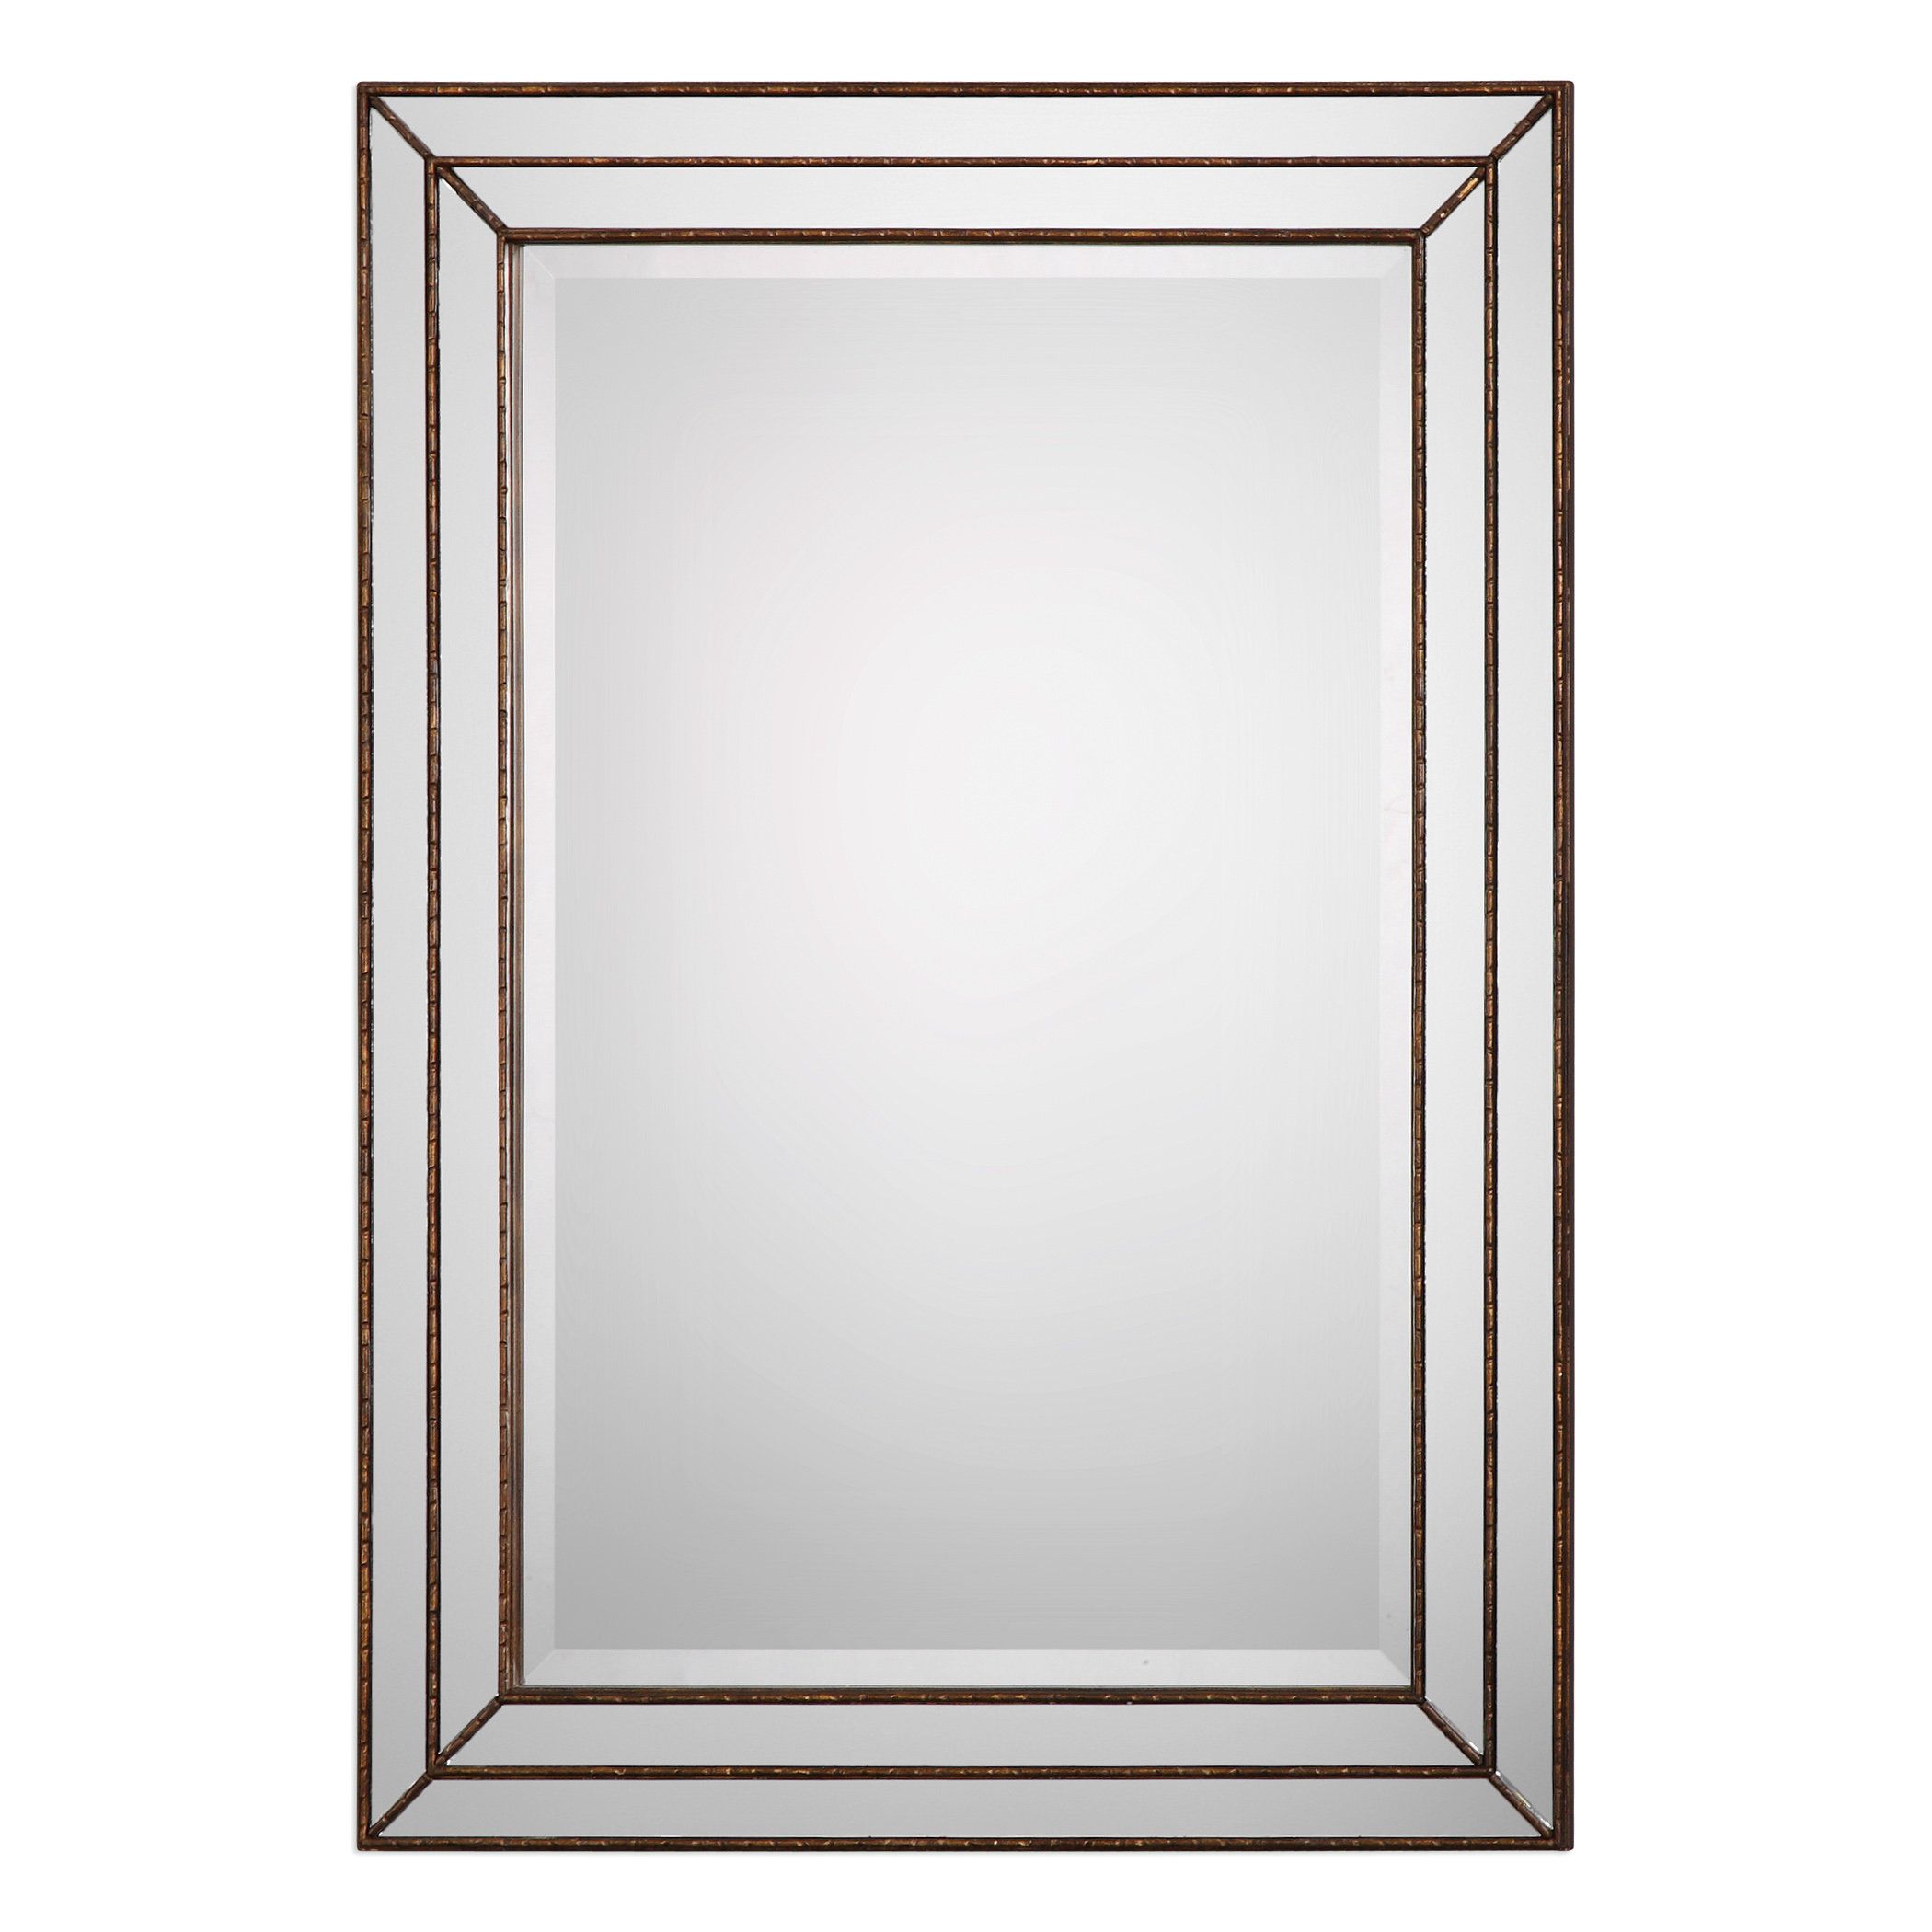 Willacoochee Traditional Beveled Accent Mirror Intended For Willacoochee Traditional Beveled Accent Mirrors (View 1 of 20)